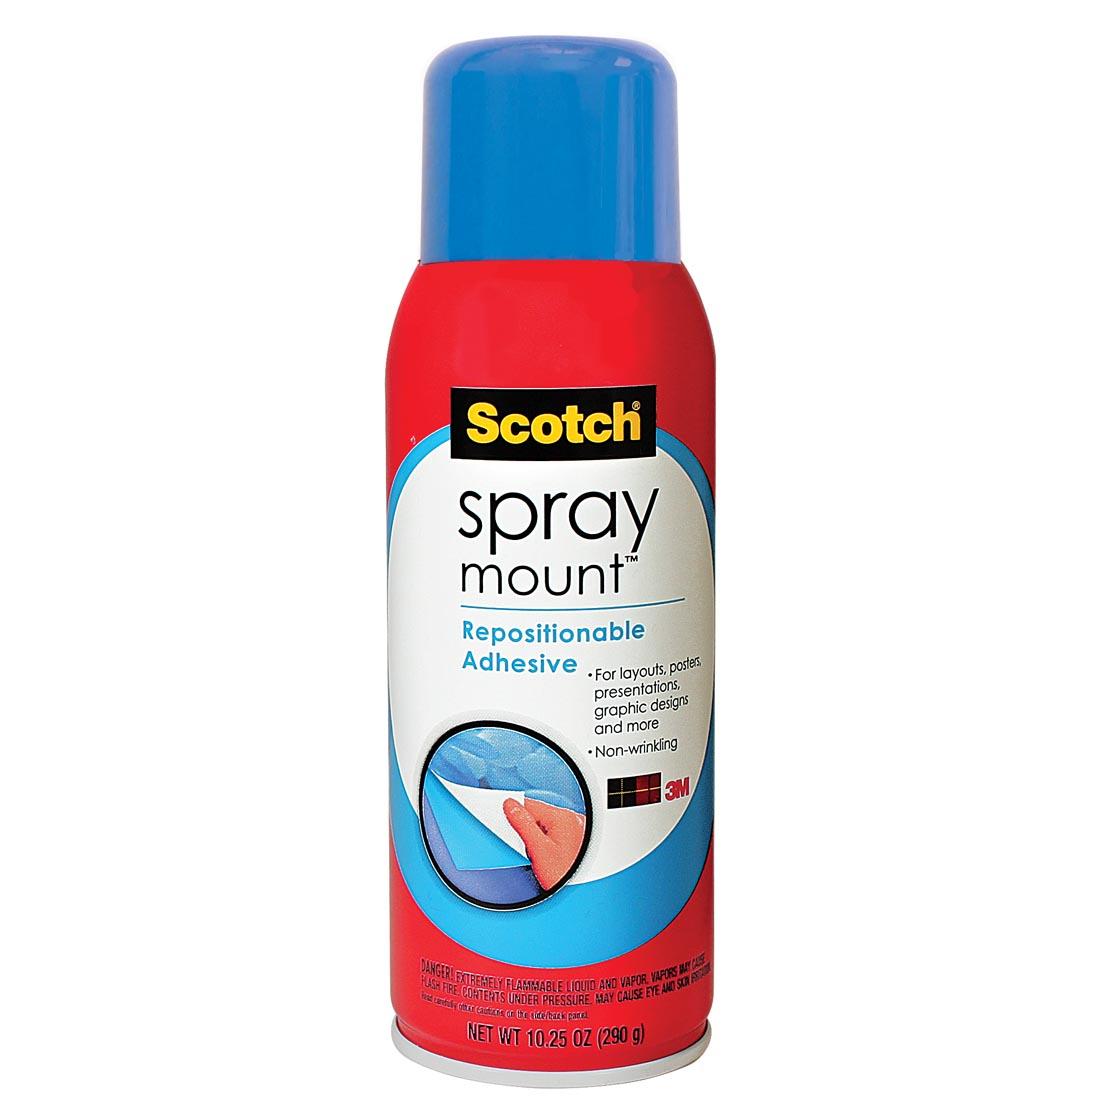 can of Scotch Spray Mount Repositionable Adhesive